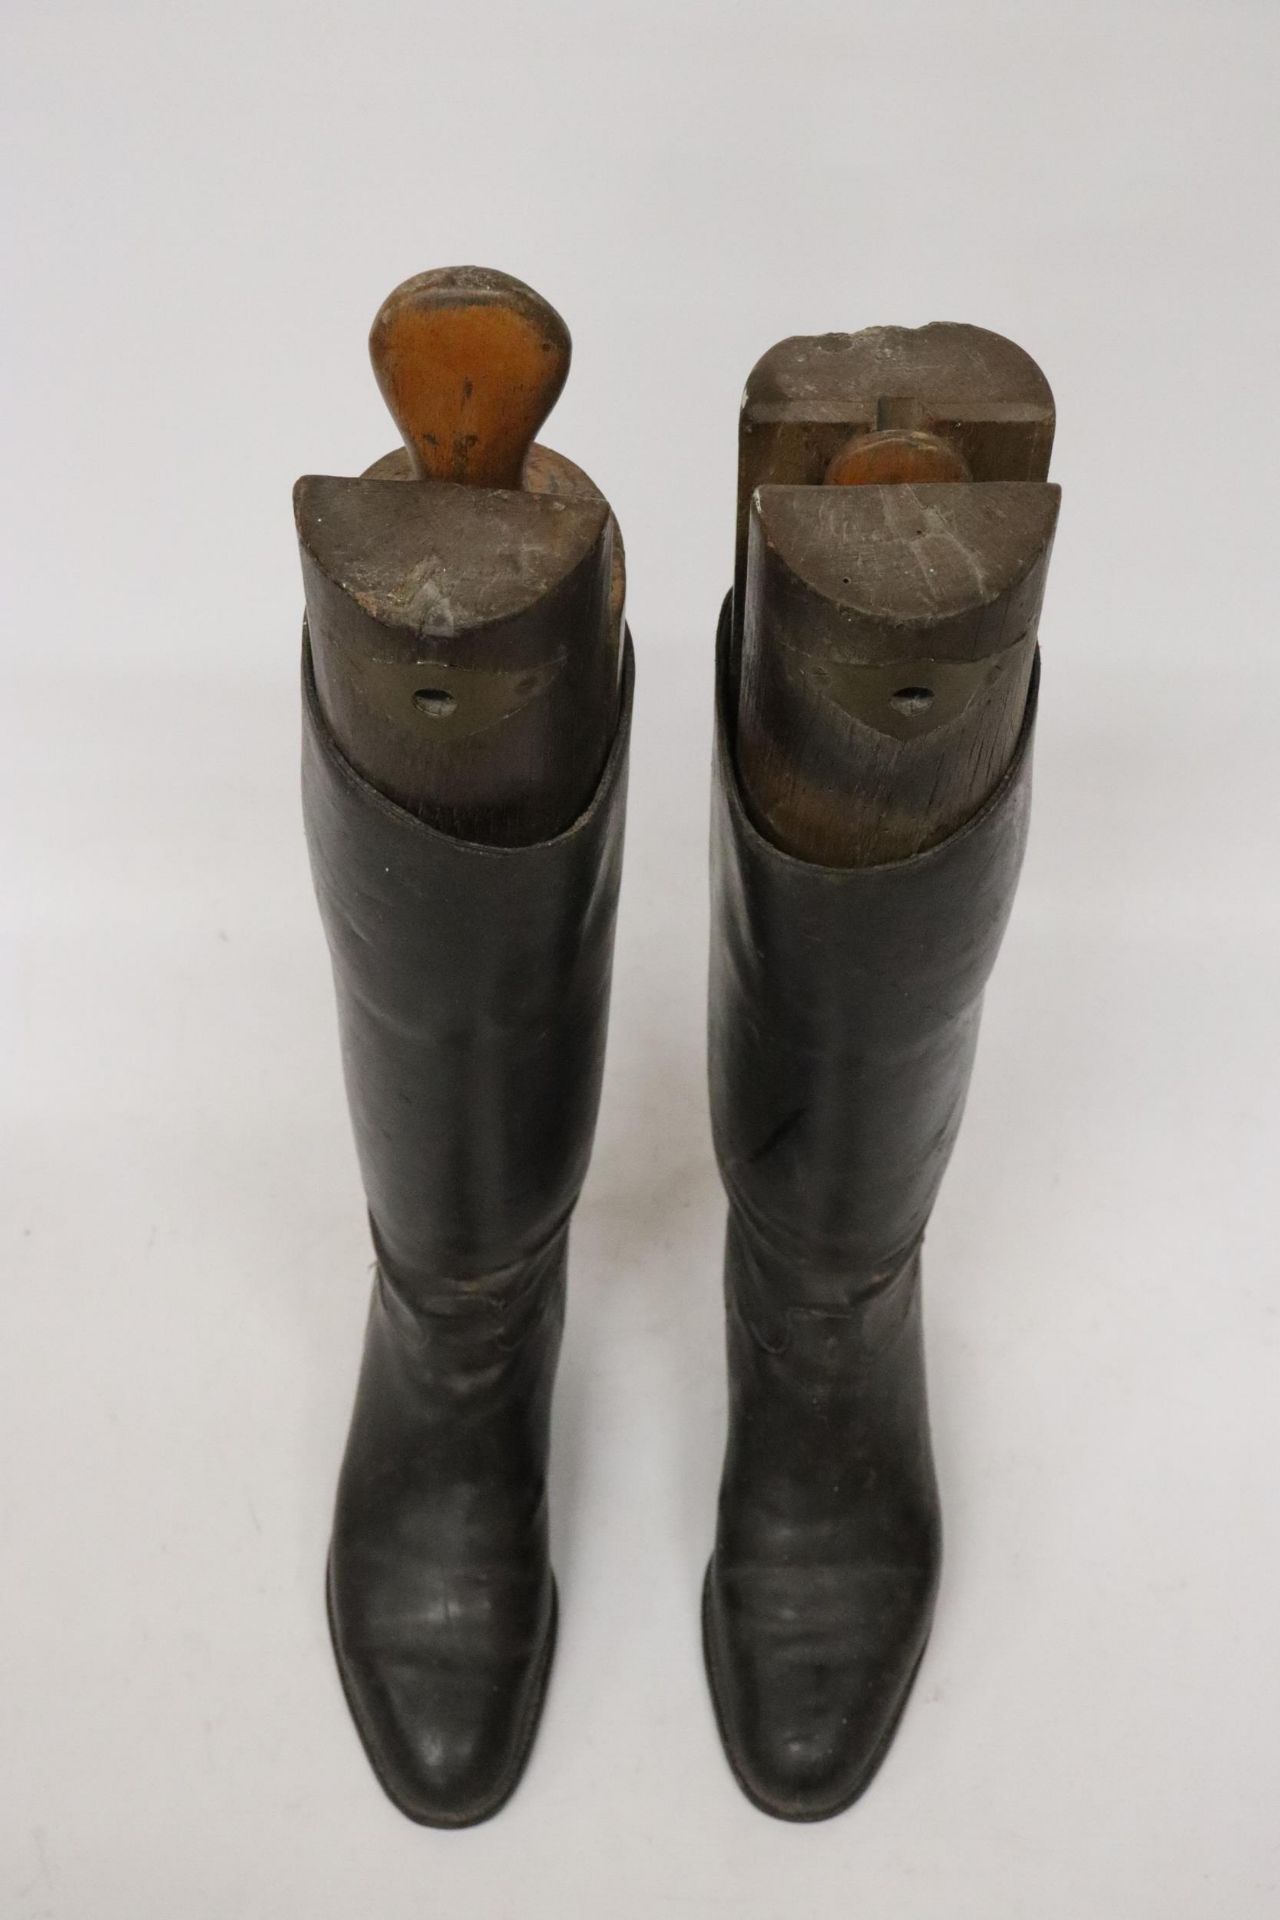 A PAIR OF VINTAGE LEATHER RIDING BOOTS WITH WOODEN BOOT TREES - Image 2 of 5